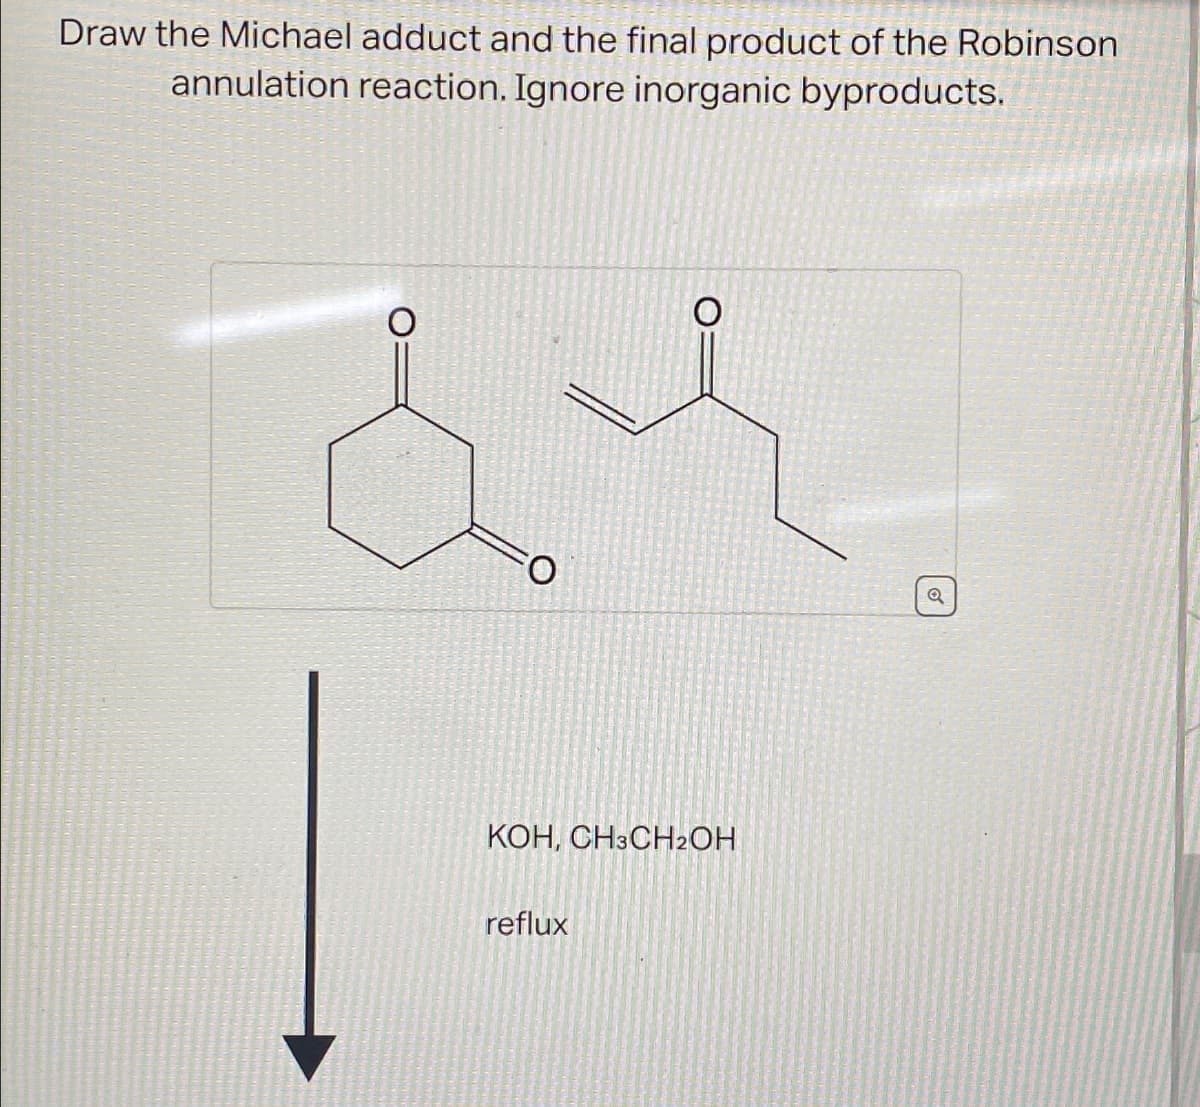 Draw the Michael adduct and the final product of the Robinson
annulation reaction. Ignore inorganic byproducts.
KOH, CH3CH2OH
reflux